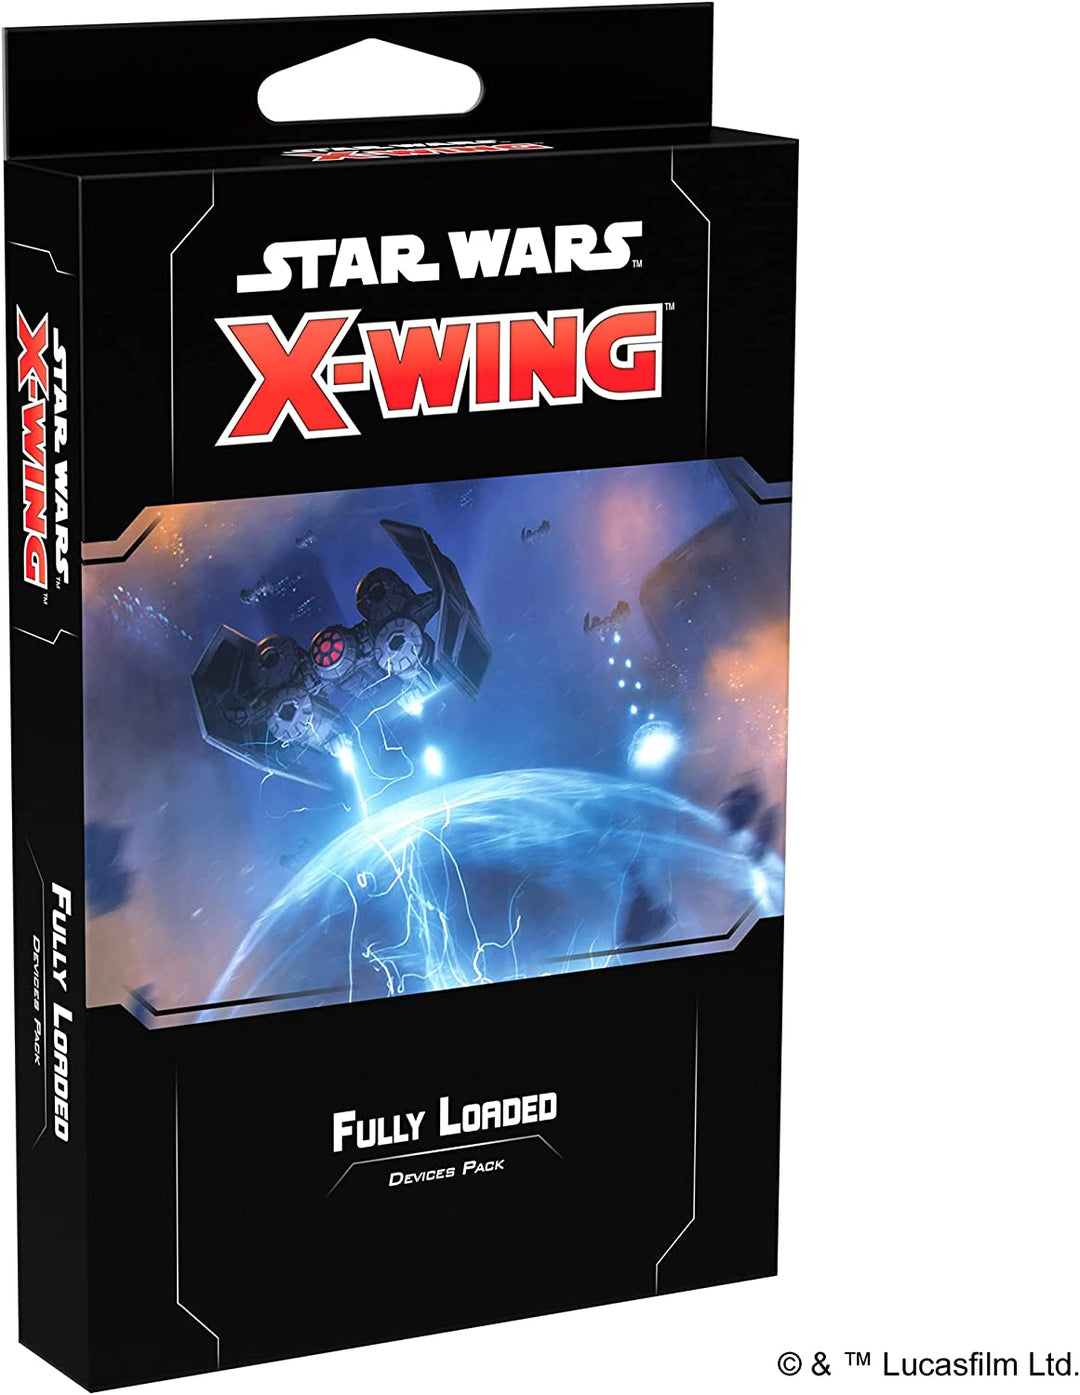 Star Wars: X-Wing - Fully Loaded Devices Pack